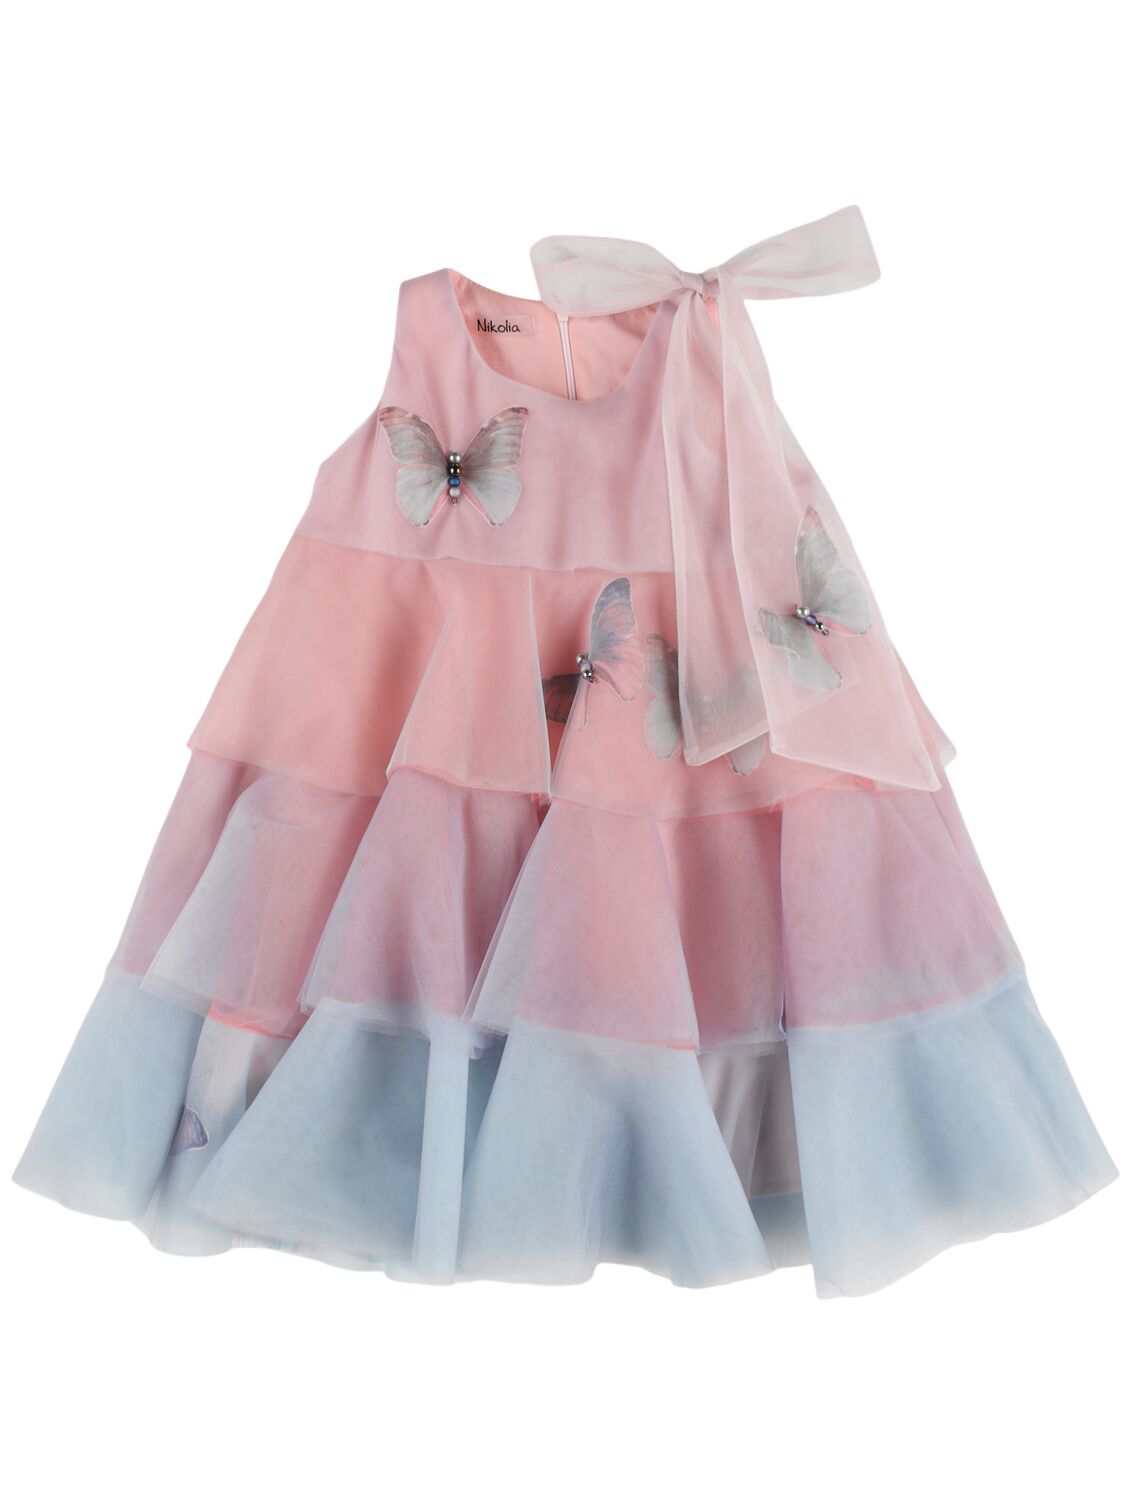 Image of Layered Tulle Dress W/ Appliqués